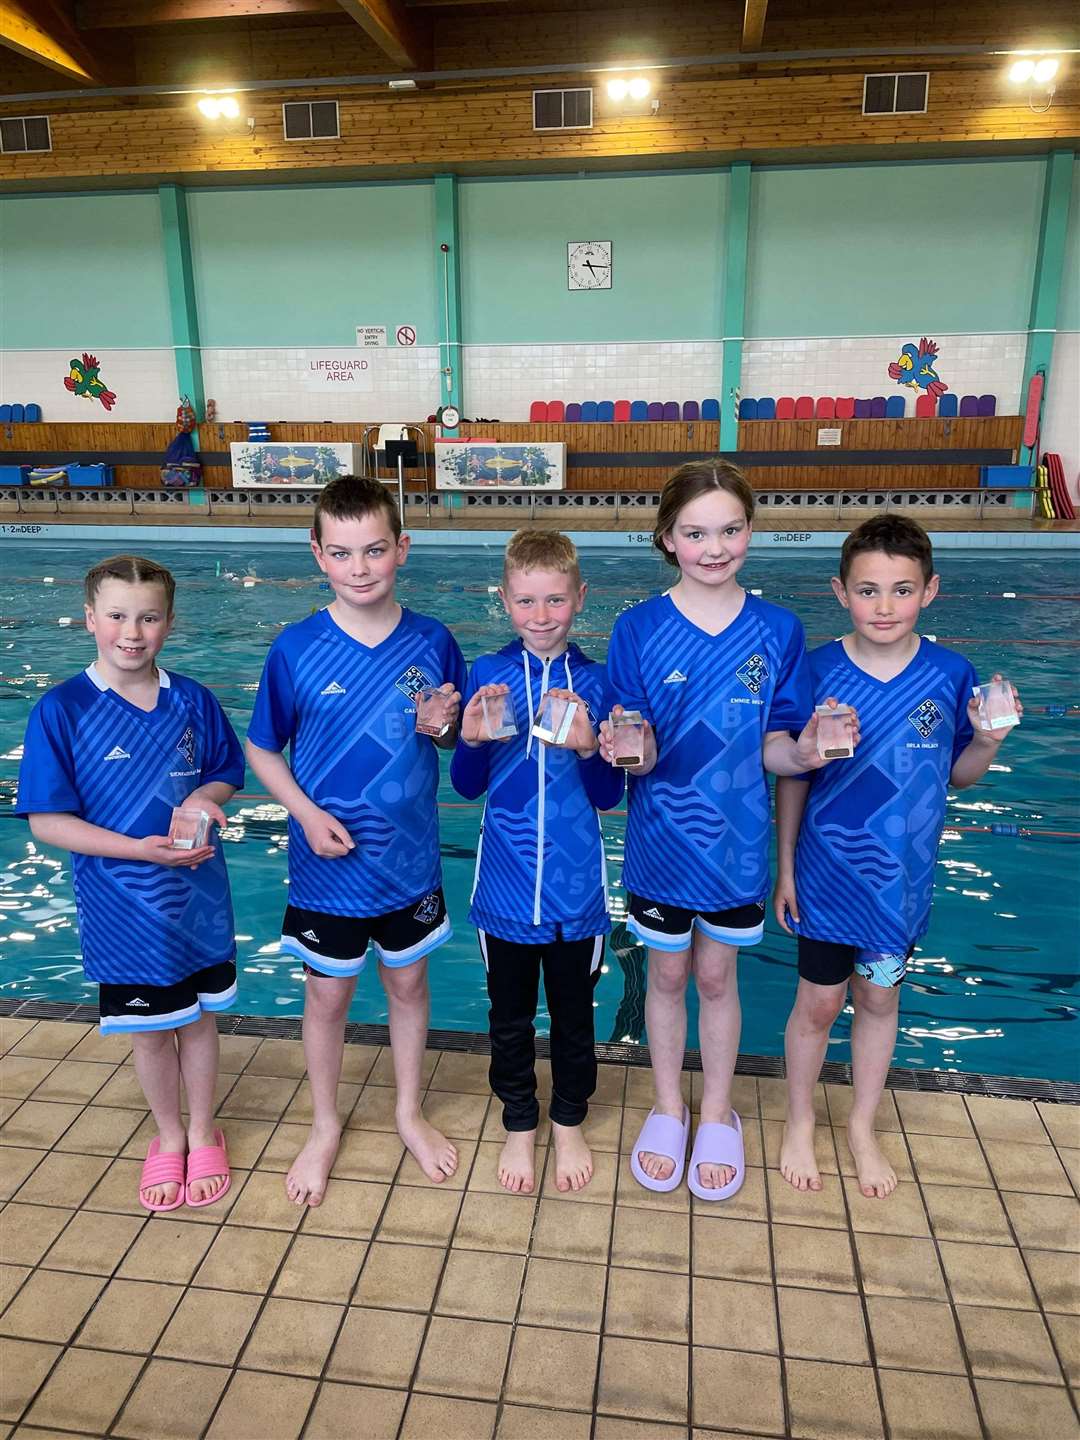 Buckie ASC swimmers (from left) Sienna Ramos Duran, Callum Stewart, Riley Russell, Emmie Murray and Cooper Beresford were best boys and girls in their age groups at the Buckie meet.